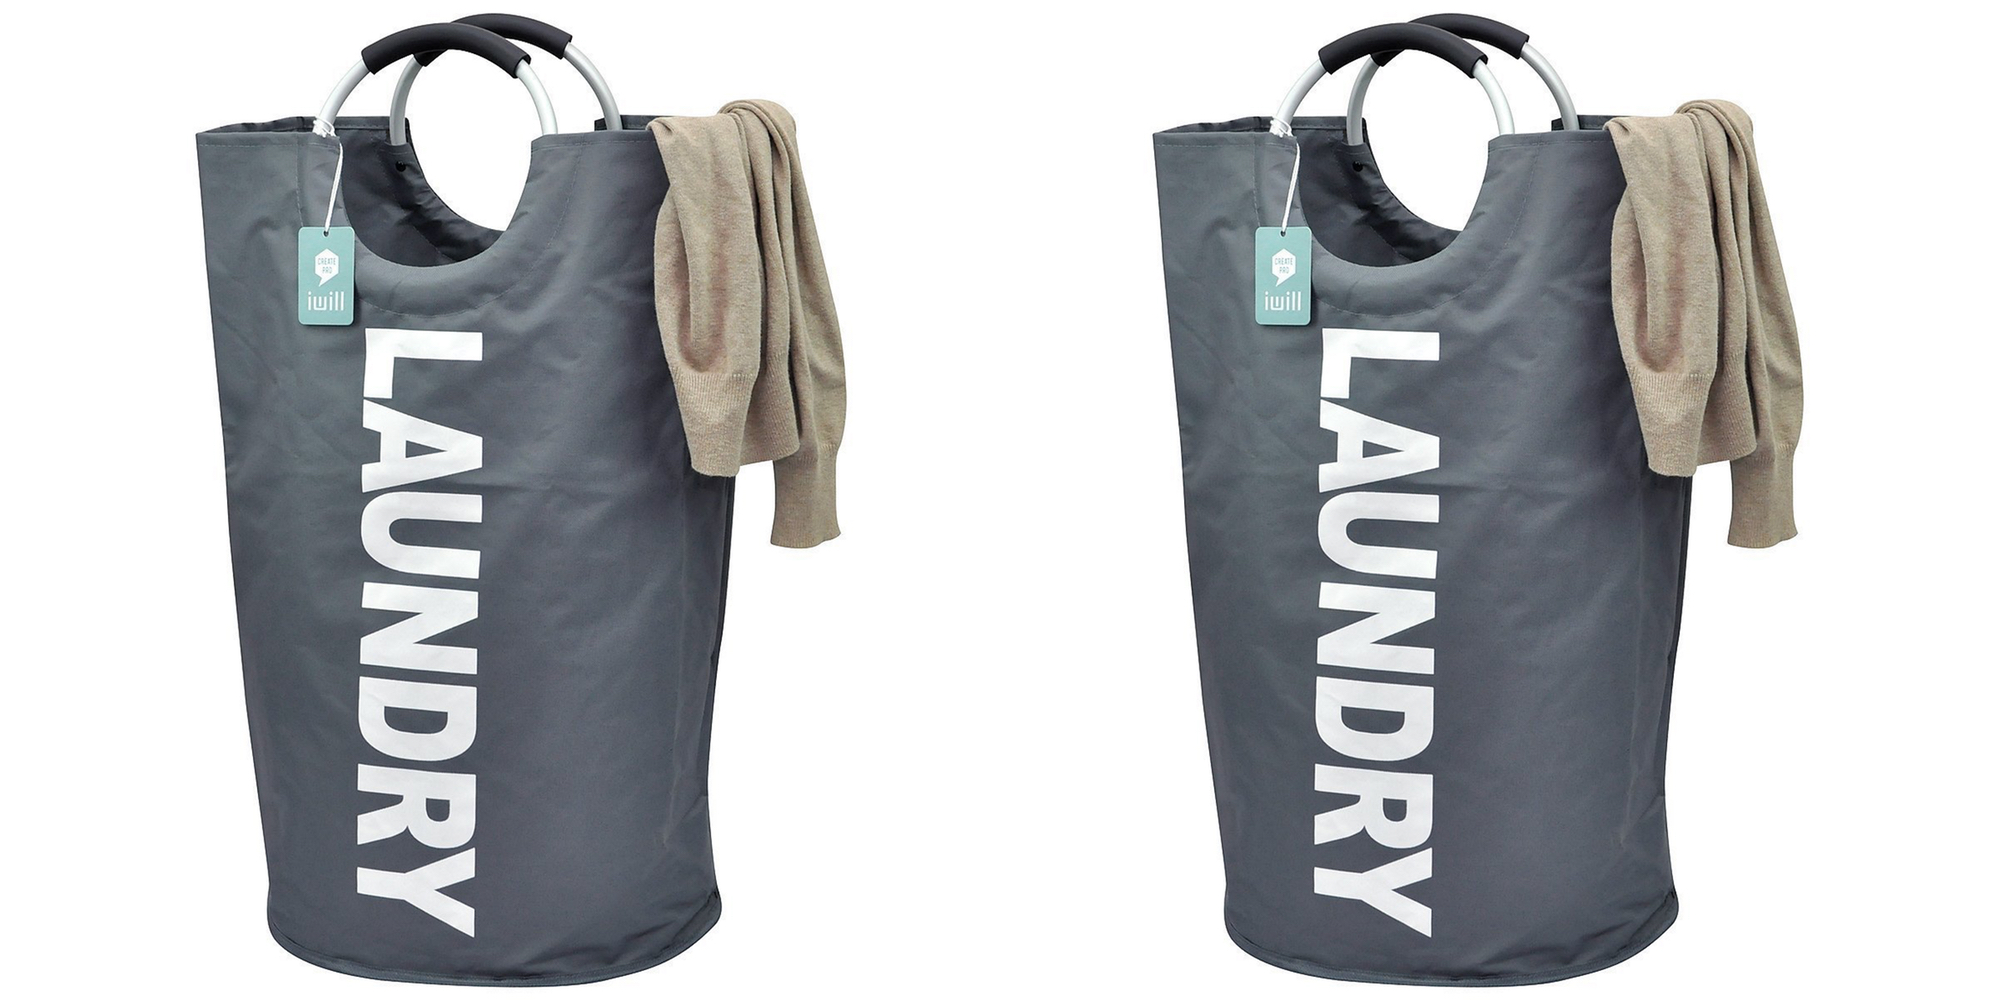 Get this Collapsible College Laundry Bag for $13 Prime shipped, more ...